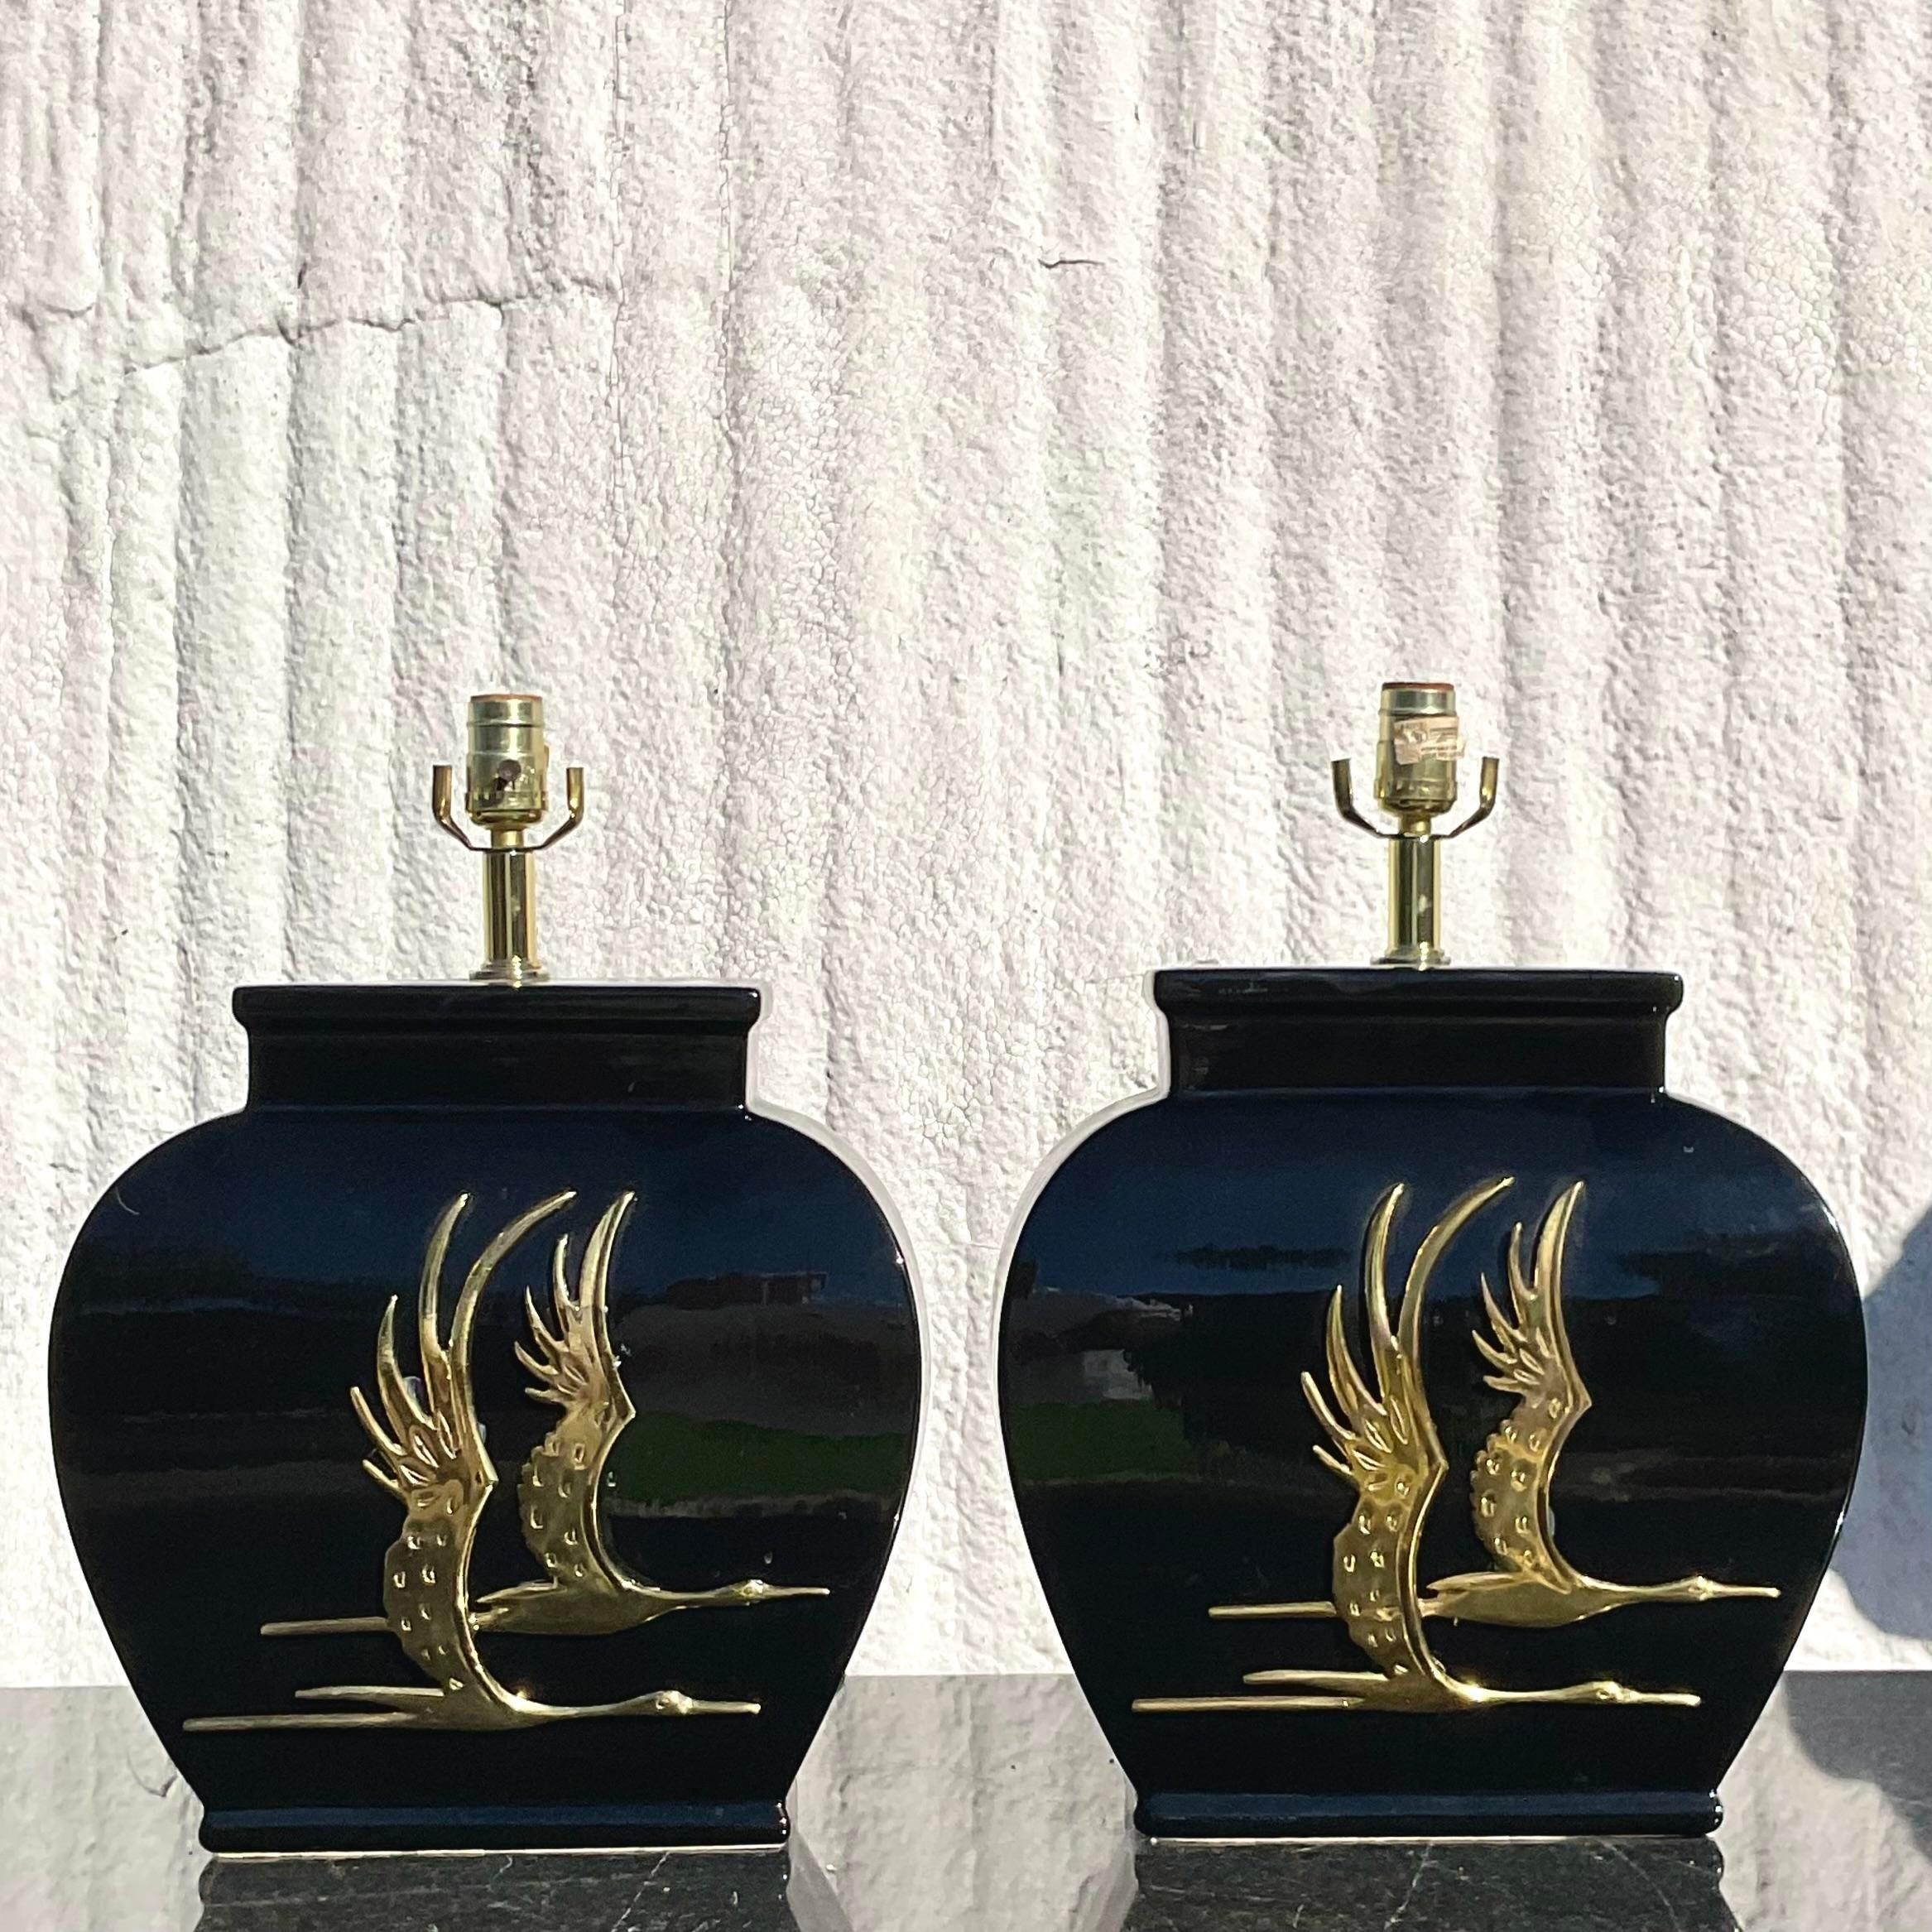 A fantastic pair of vintage Regency table lamps. A chic black glazed ceramic with brass herons flying across the front. Acquired from a Palm Beach estate.